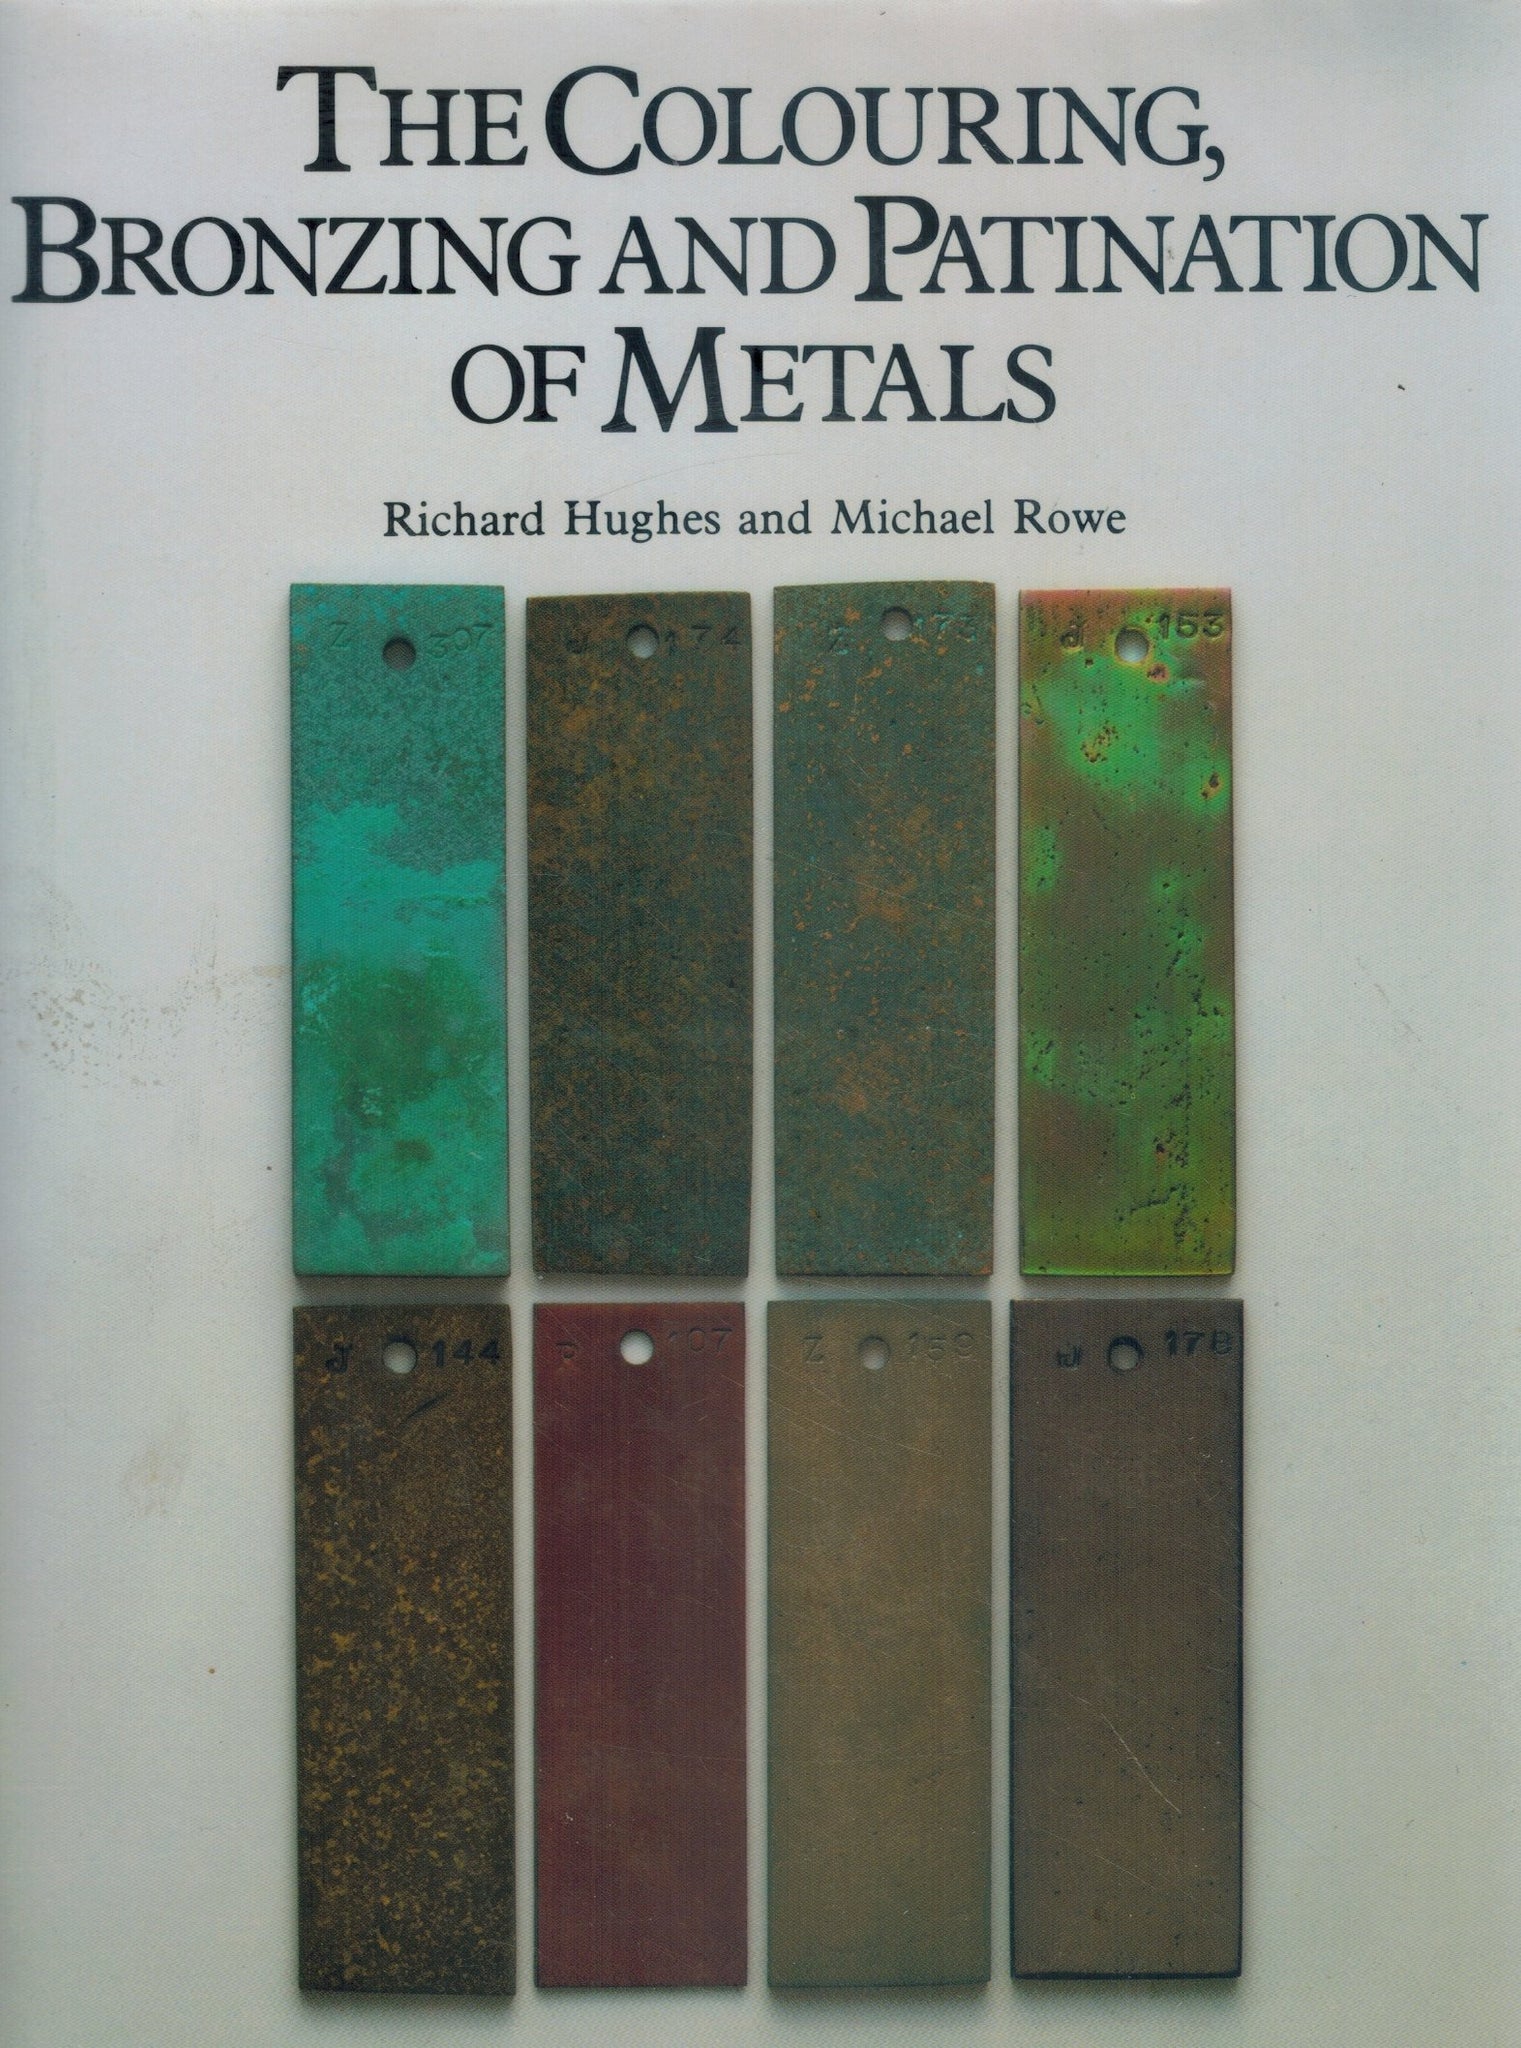 THE COLOURING, BRONZING AND PATINATION OF METALS  by Hughes, Richard & Michael Rowe